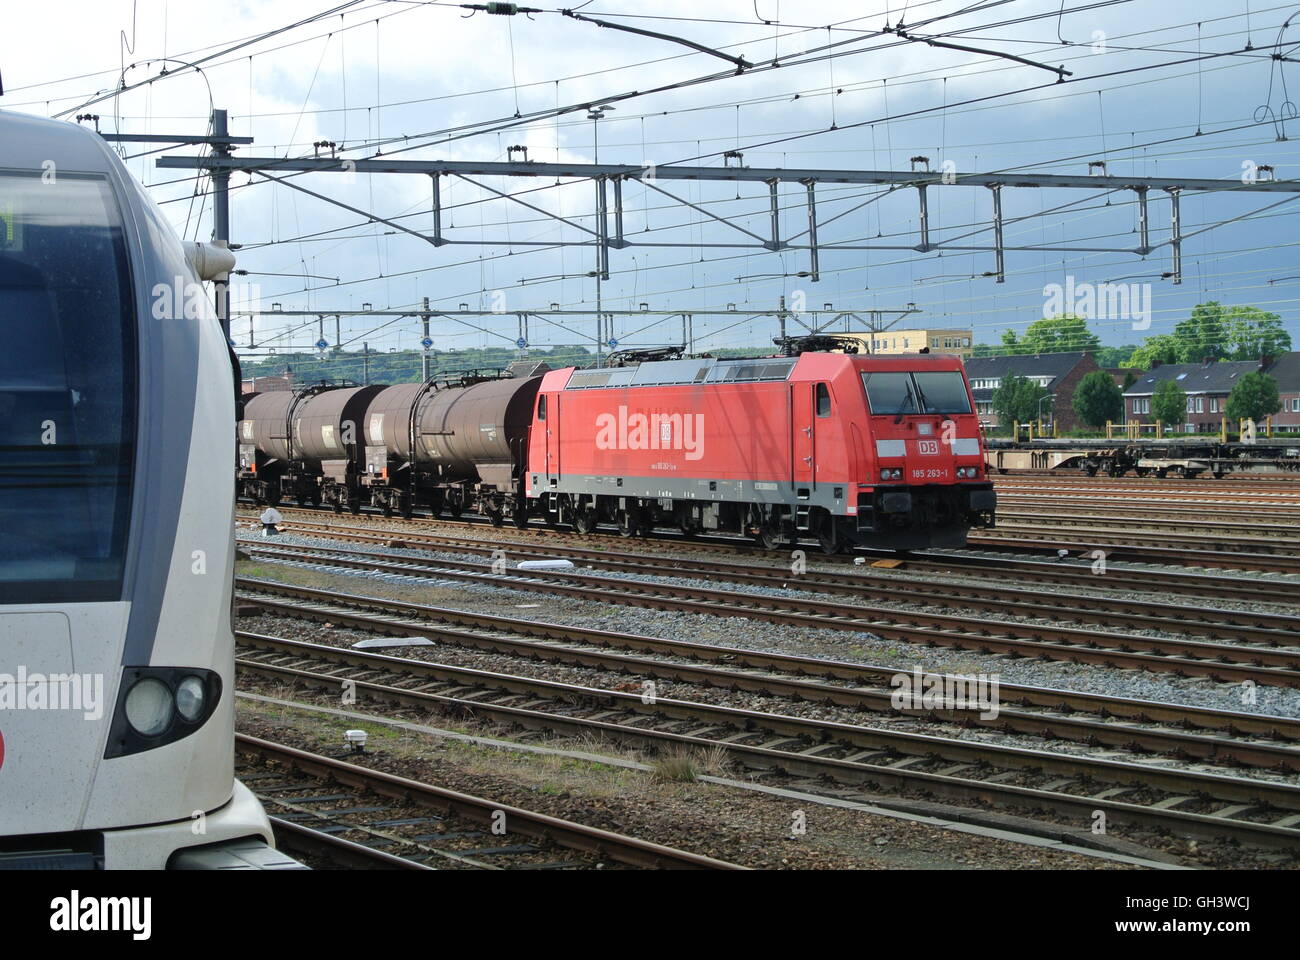 DB class 189 Eurosprinter Train with tanker wagons at Venlo, Holland, Stock Photo